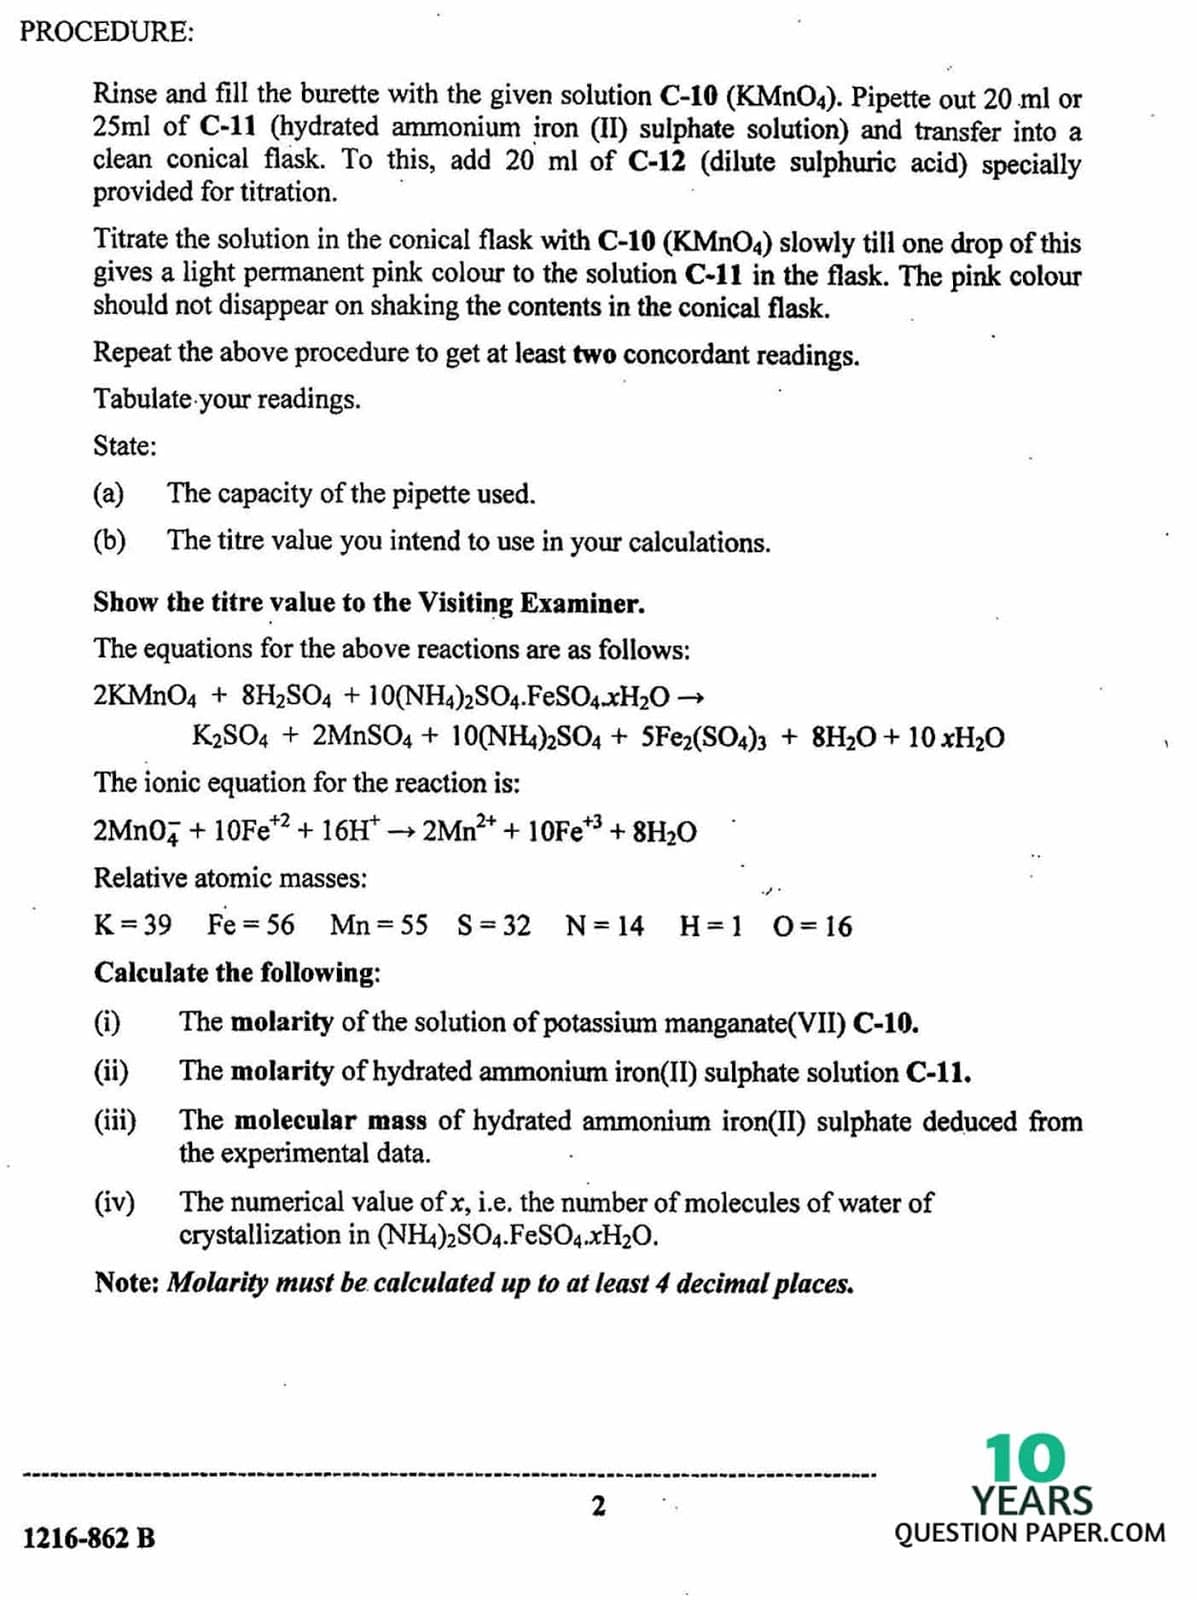 ISC Class 12 Chemistry Practical 2016 Question Paper